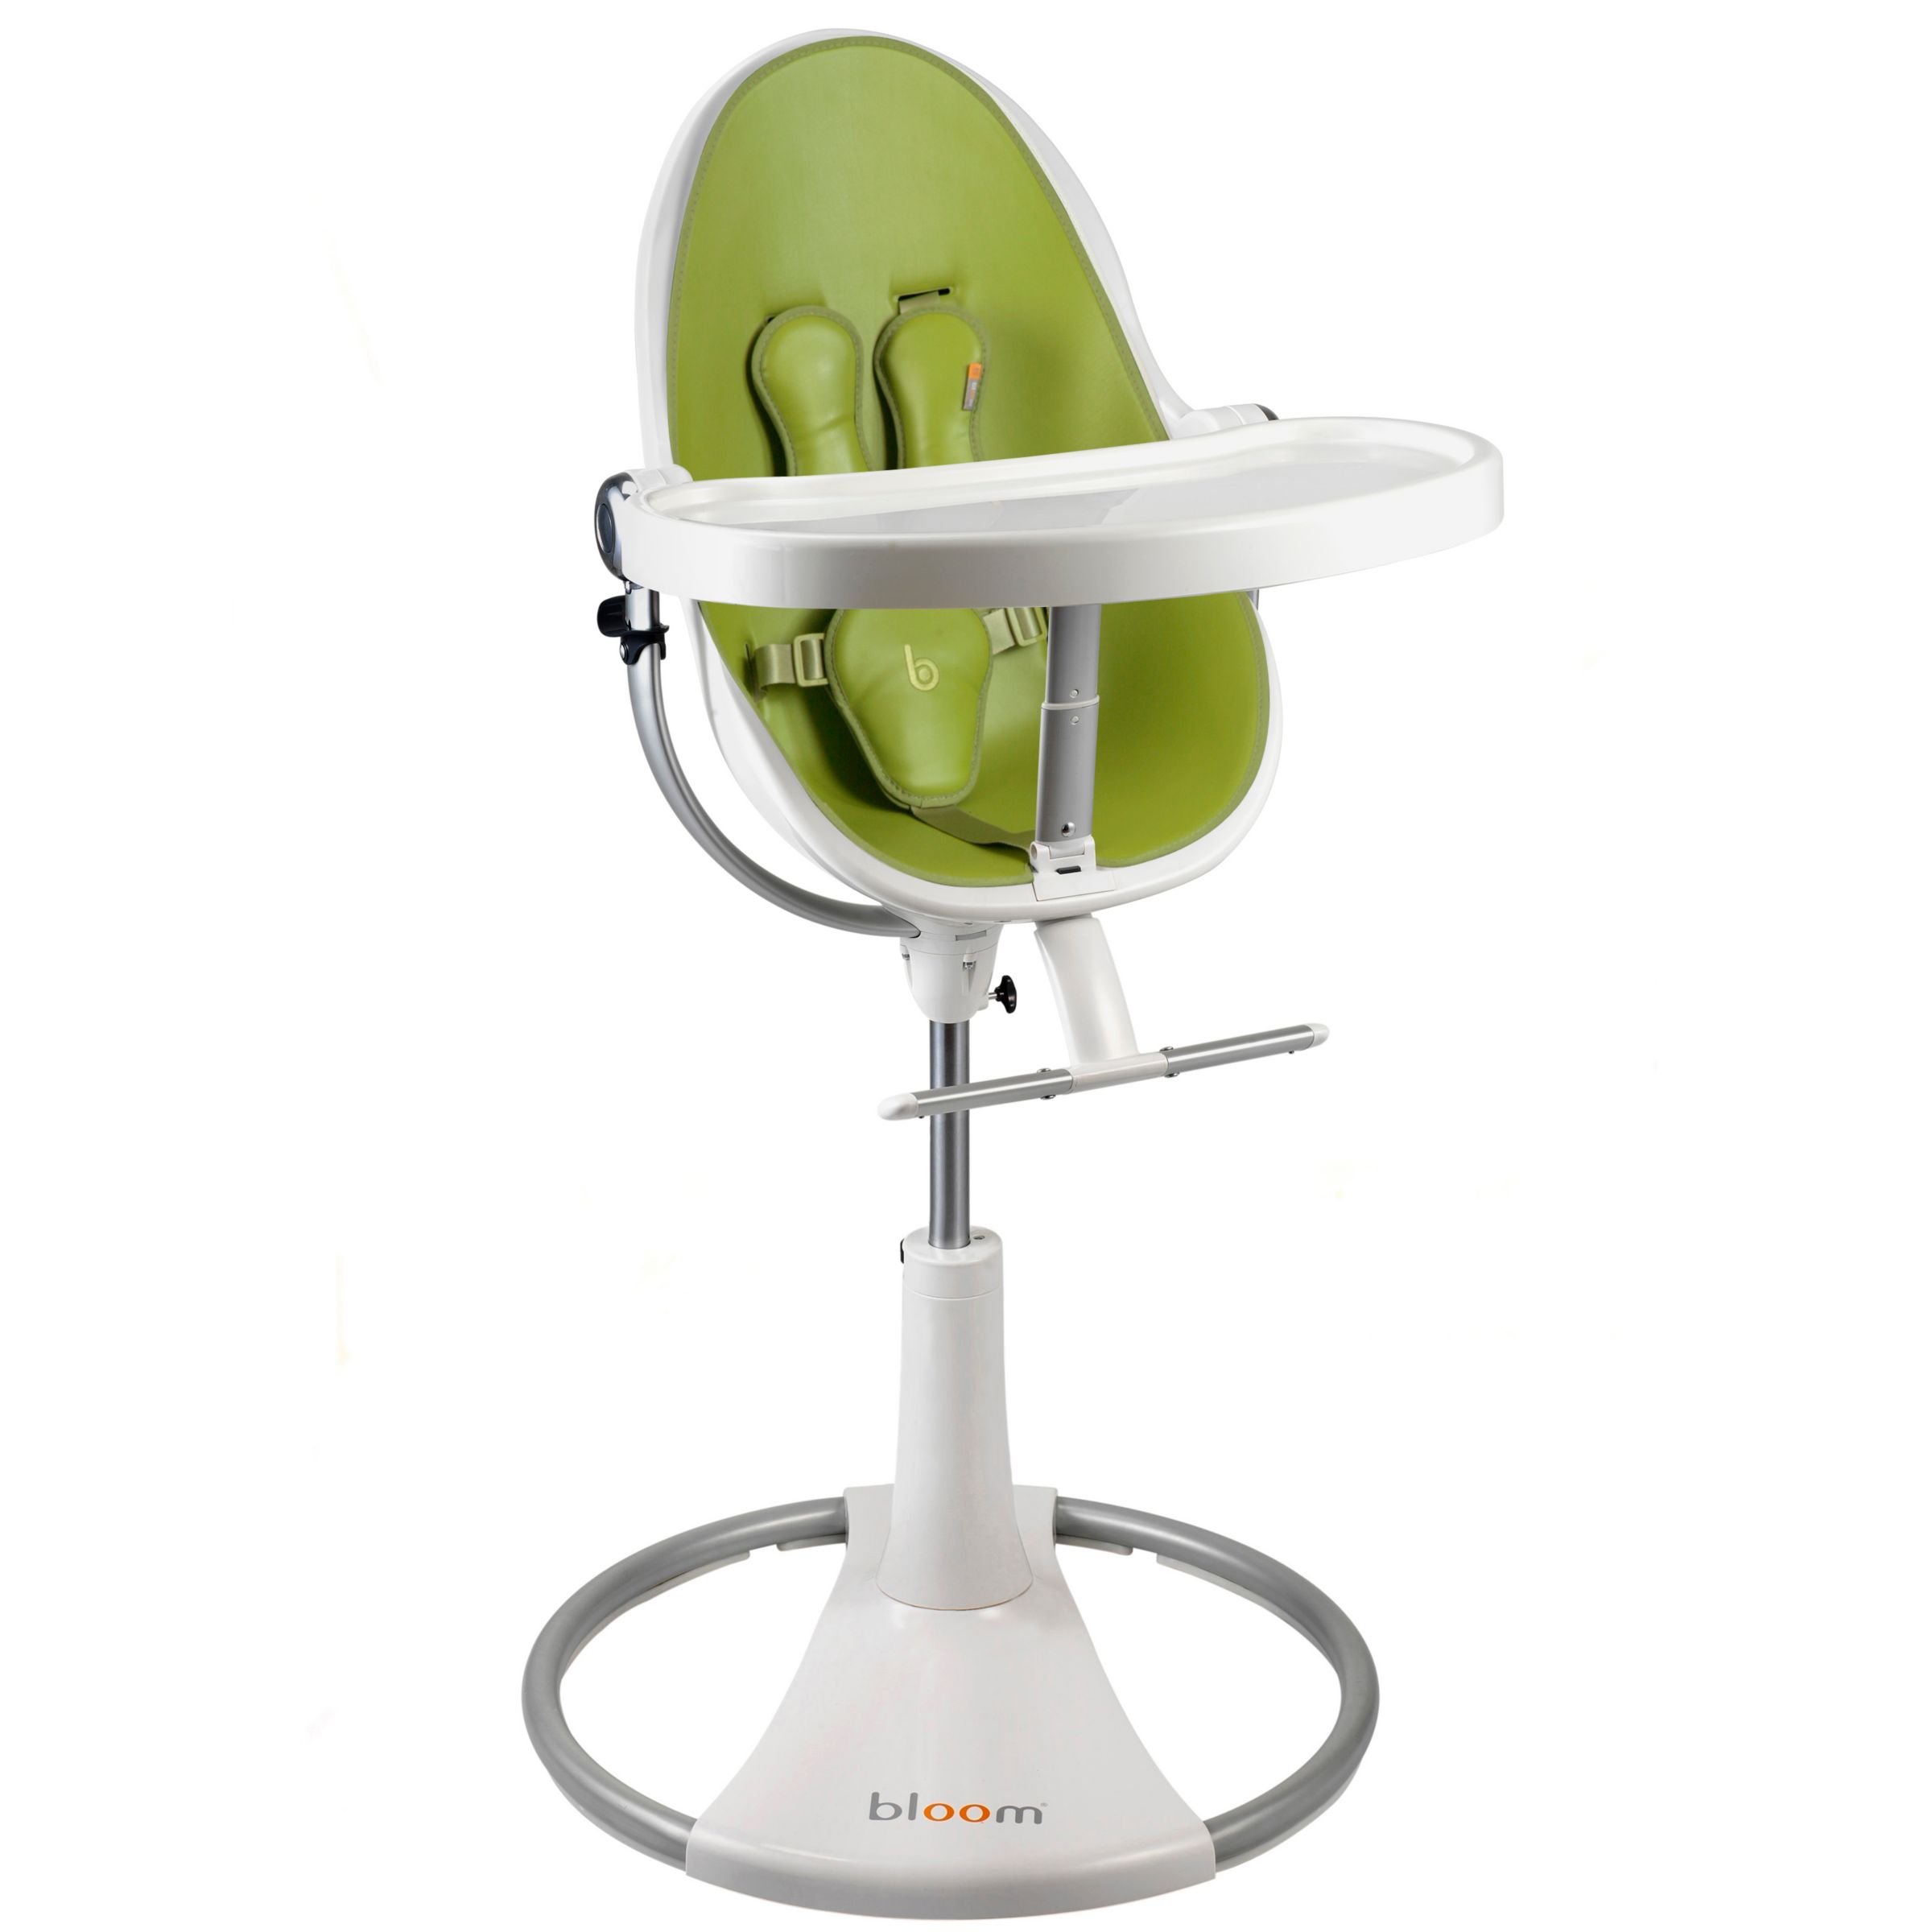 bloom Fresco Loft Contemporary Leatherette Baby Chair, Ivory White with Gala Green at John Lewis